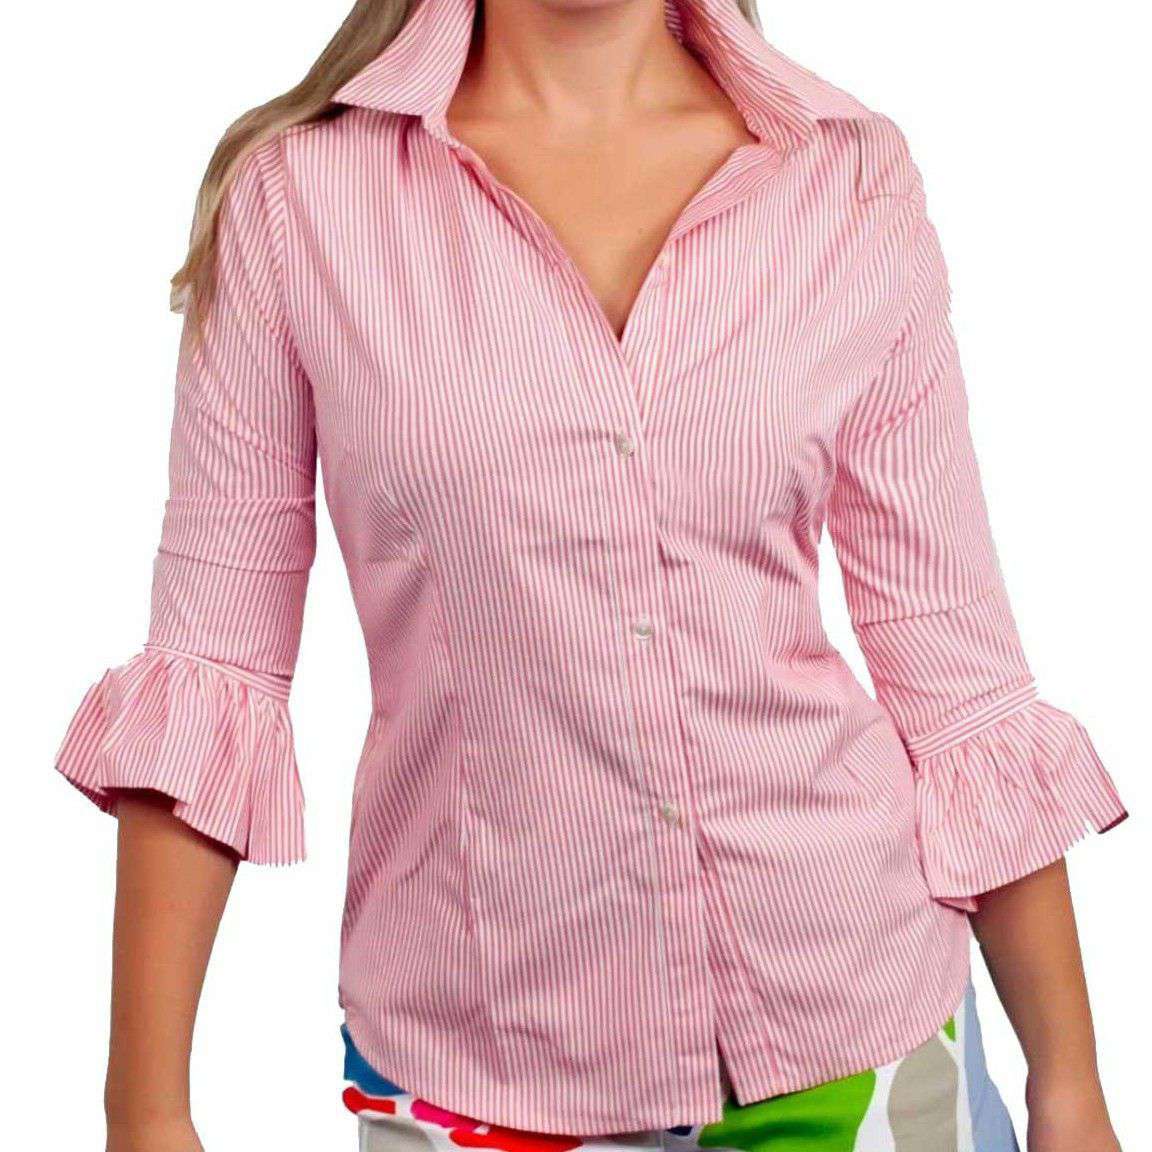 Priss Brooks Blouse in Coral by Gretchen Scott Designs - Country Club Prep